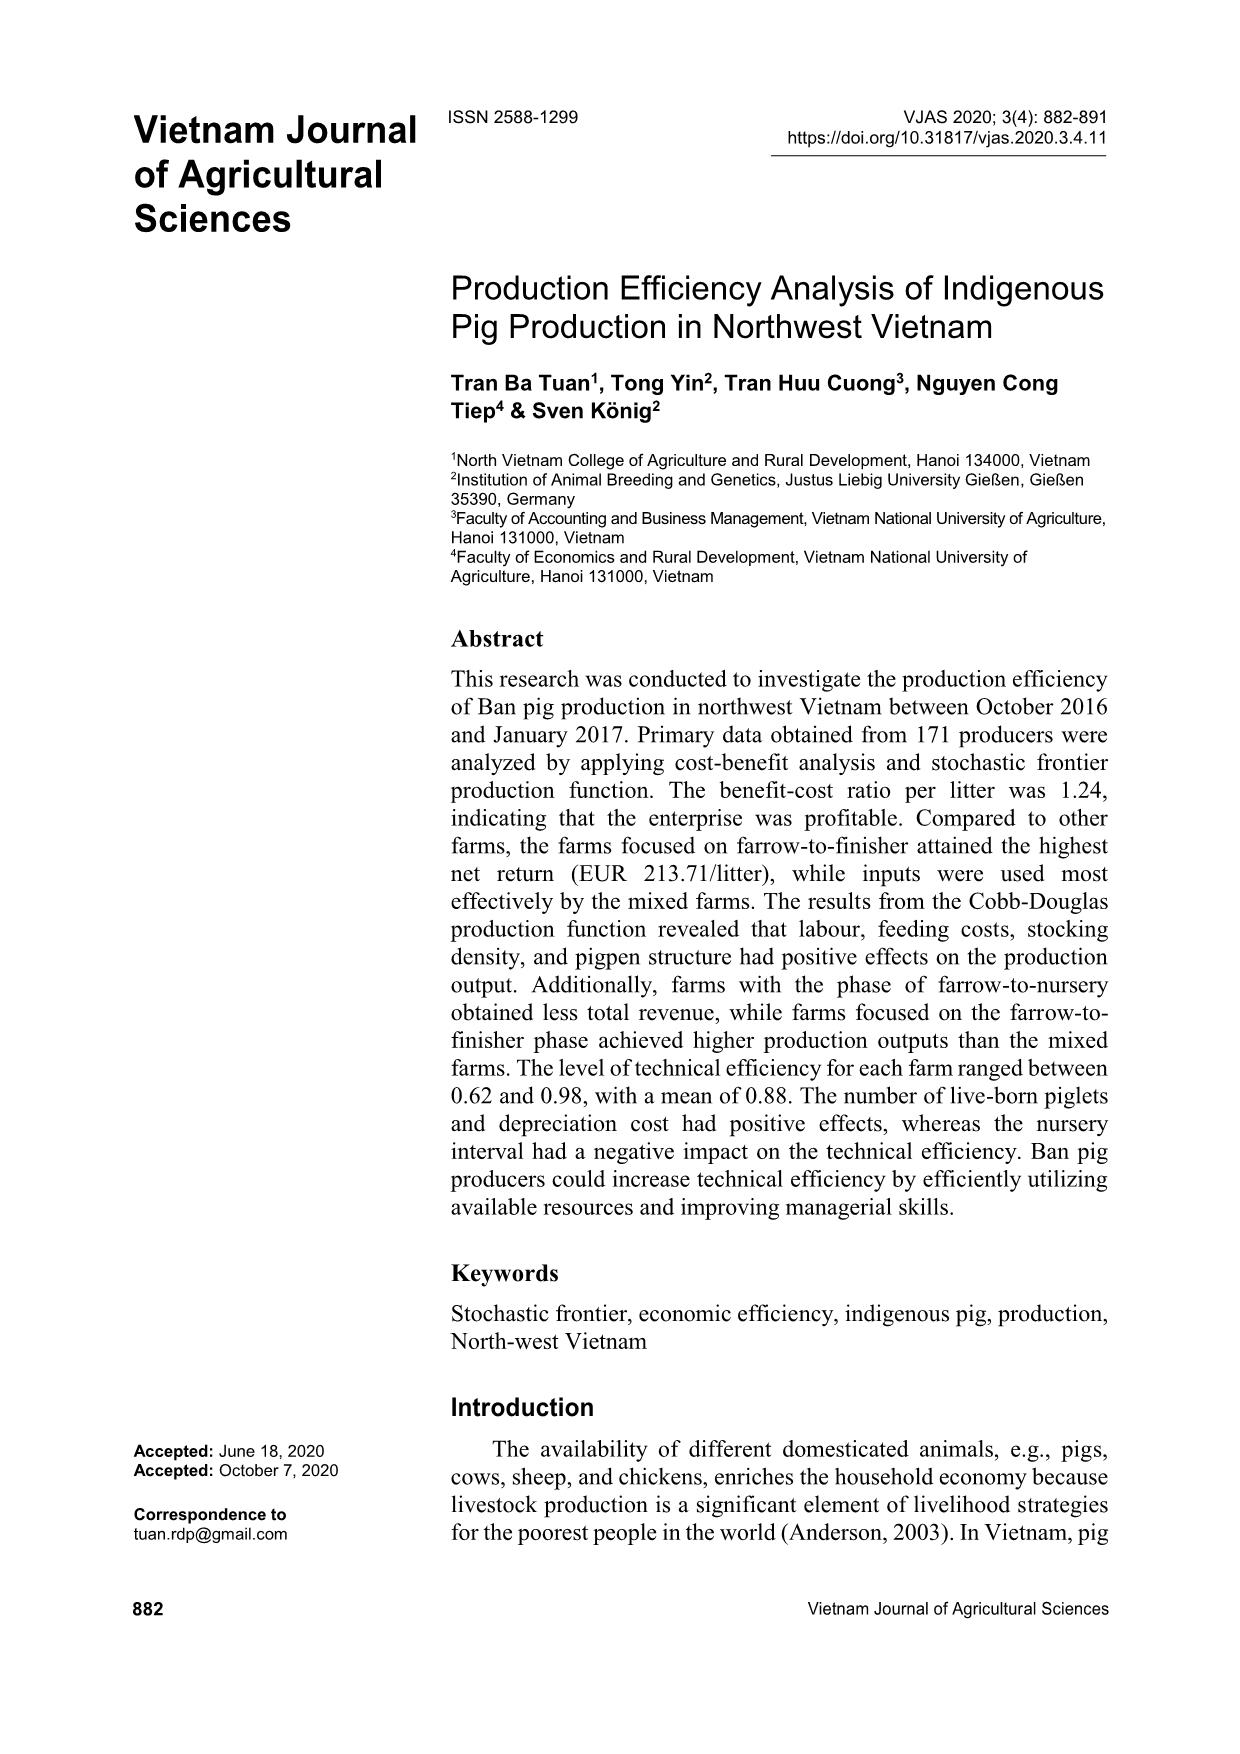 Production efficiency analysis of indigenous pig production in Northwest Vietnam trang 1